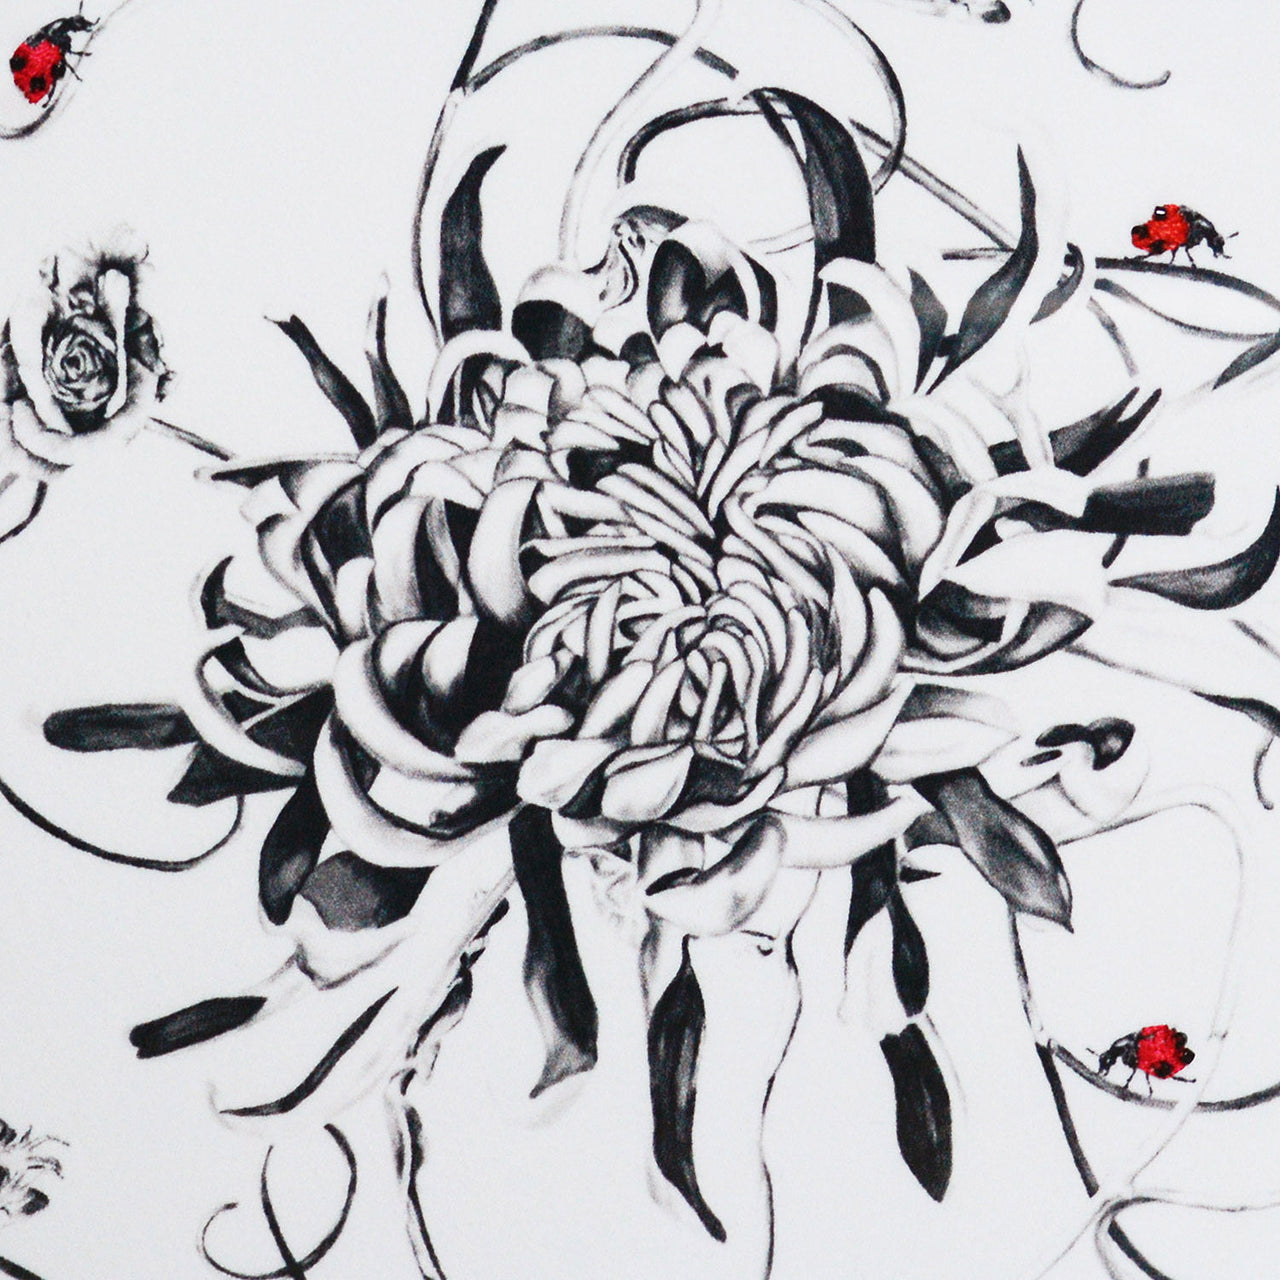 Artwork with monochrome floral design and hand embroidered ladybirds close up